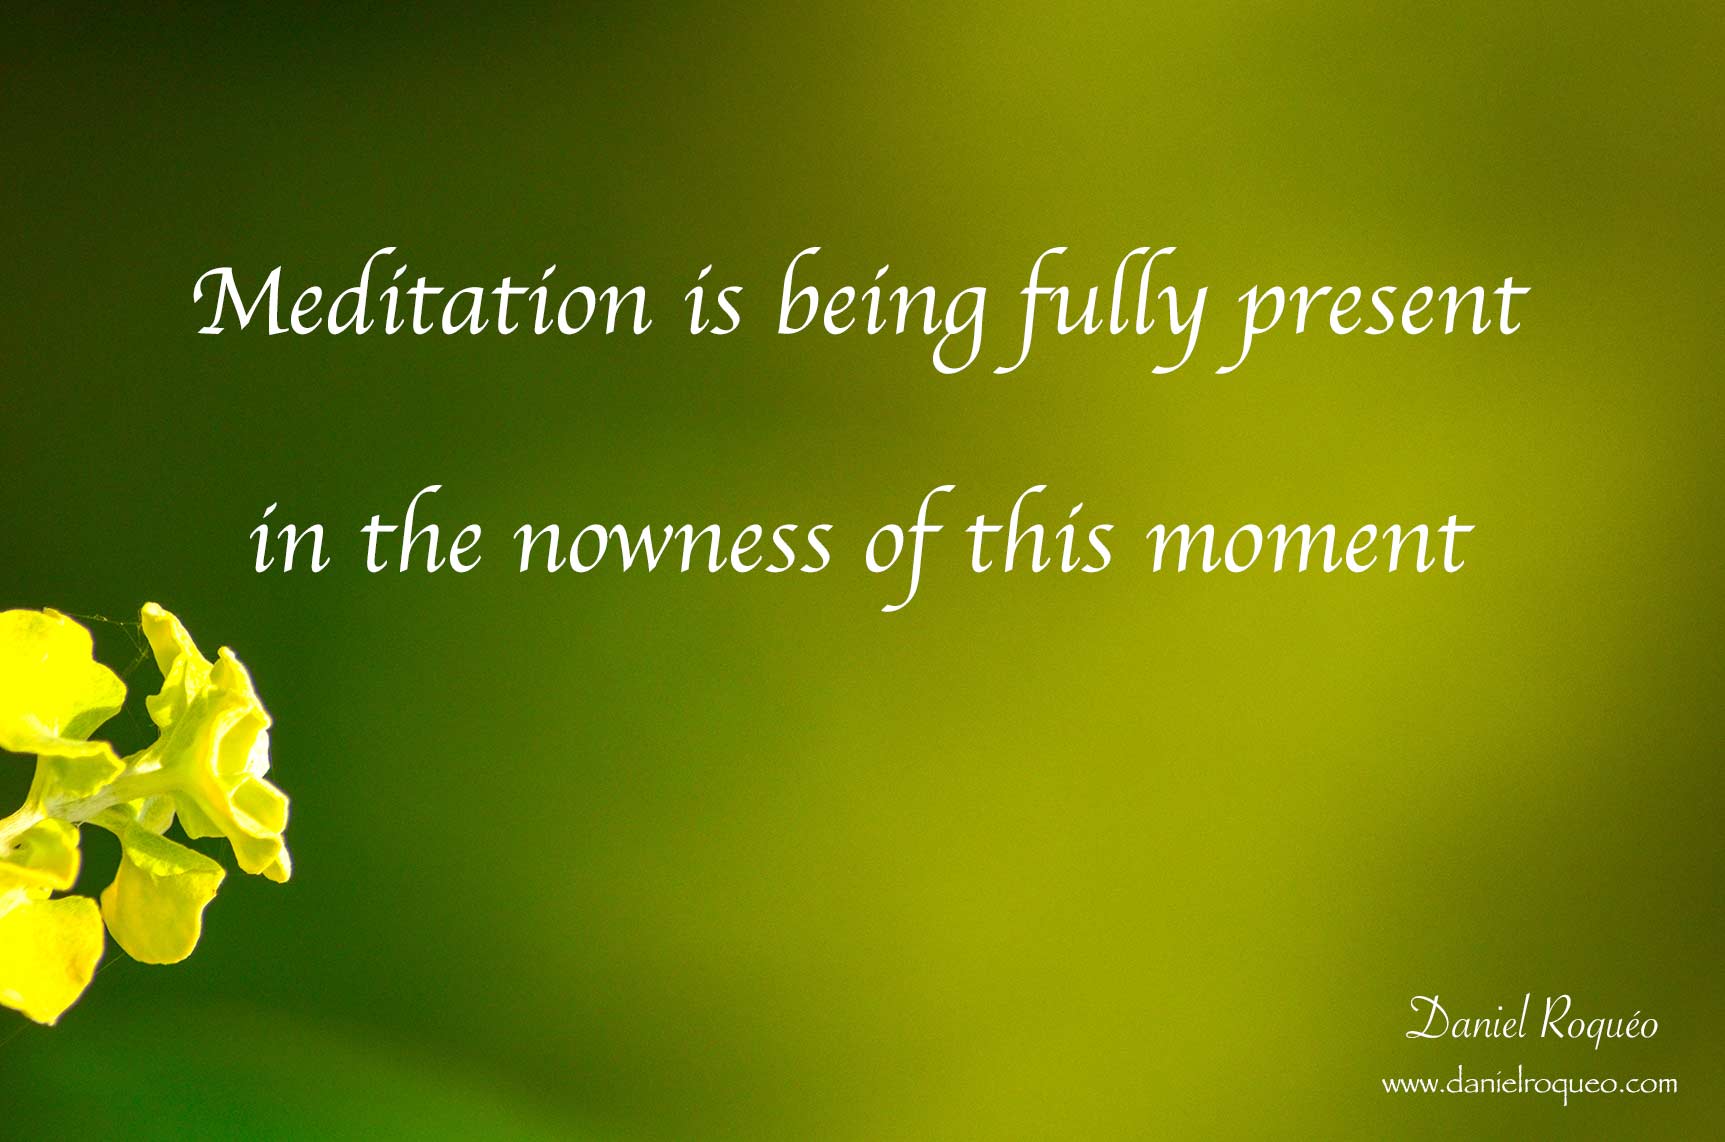 Meditation is being fully present in the nowness of this moment